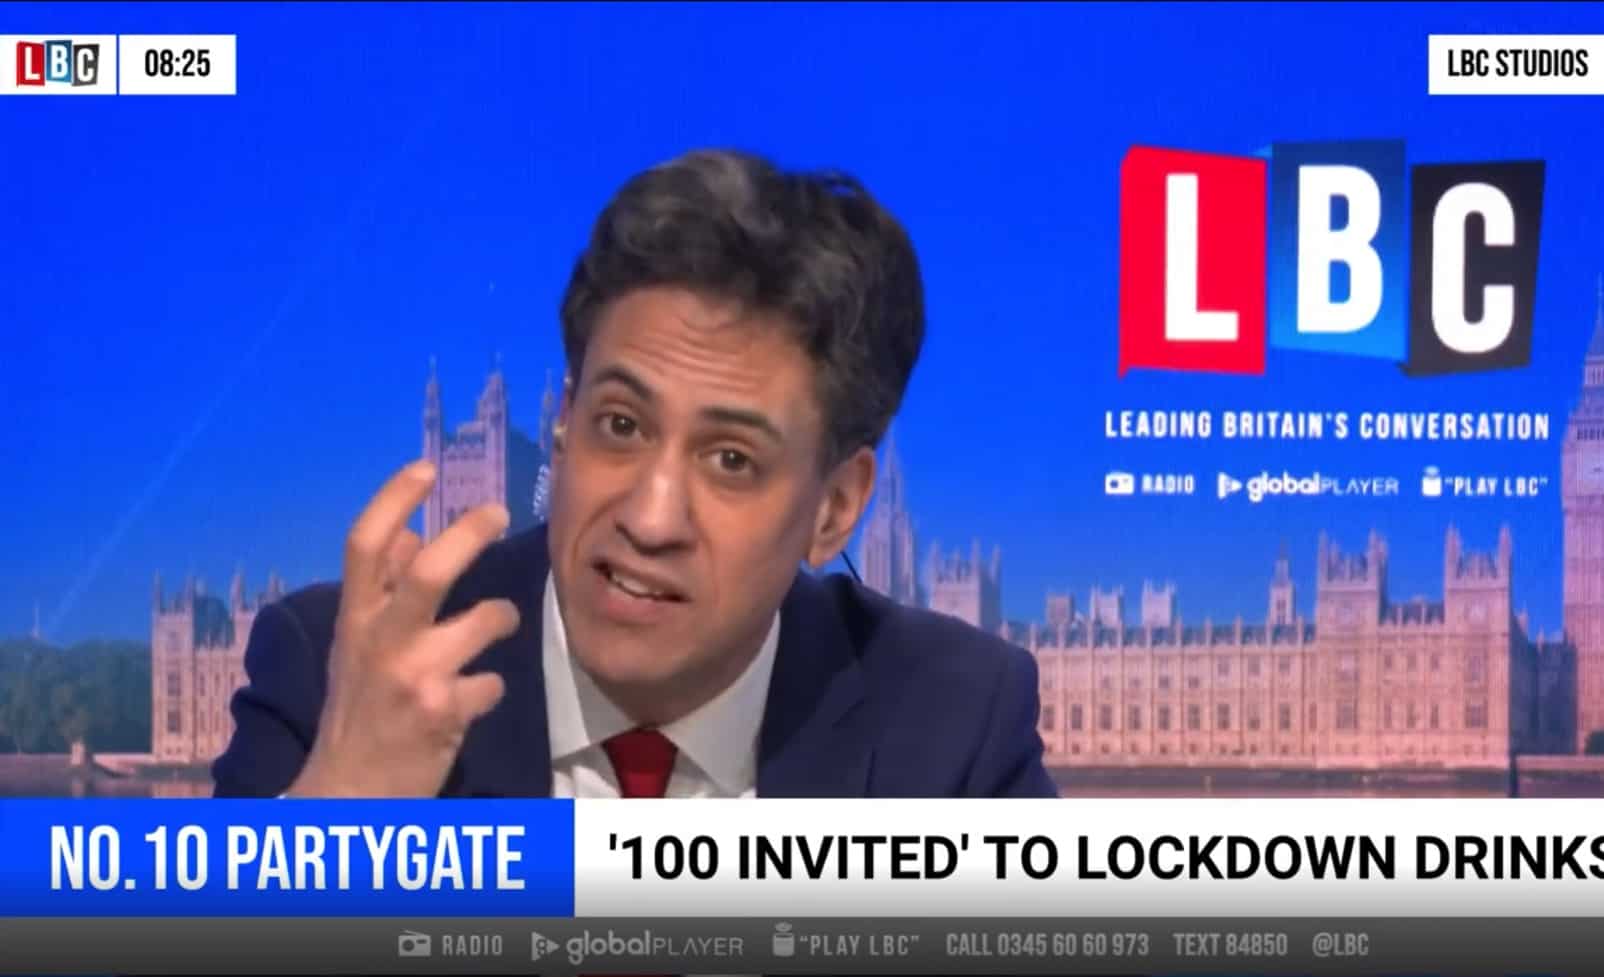 ‘If I went to a party, I know I went’: Ed Miliband’s lockdown party comments go viral